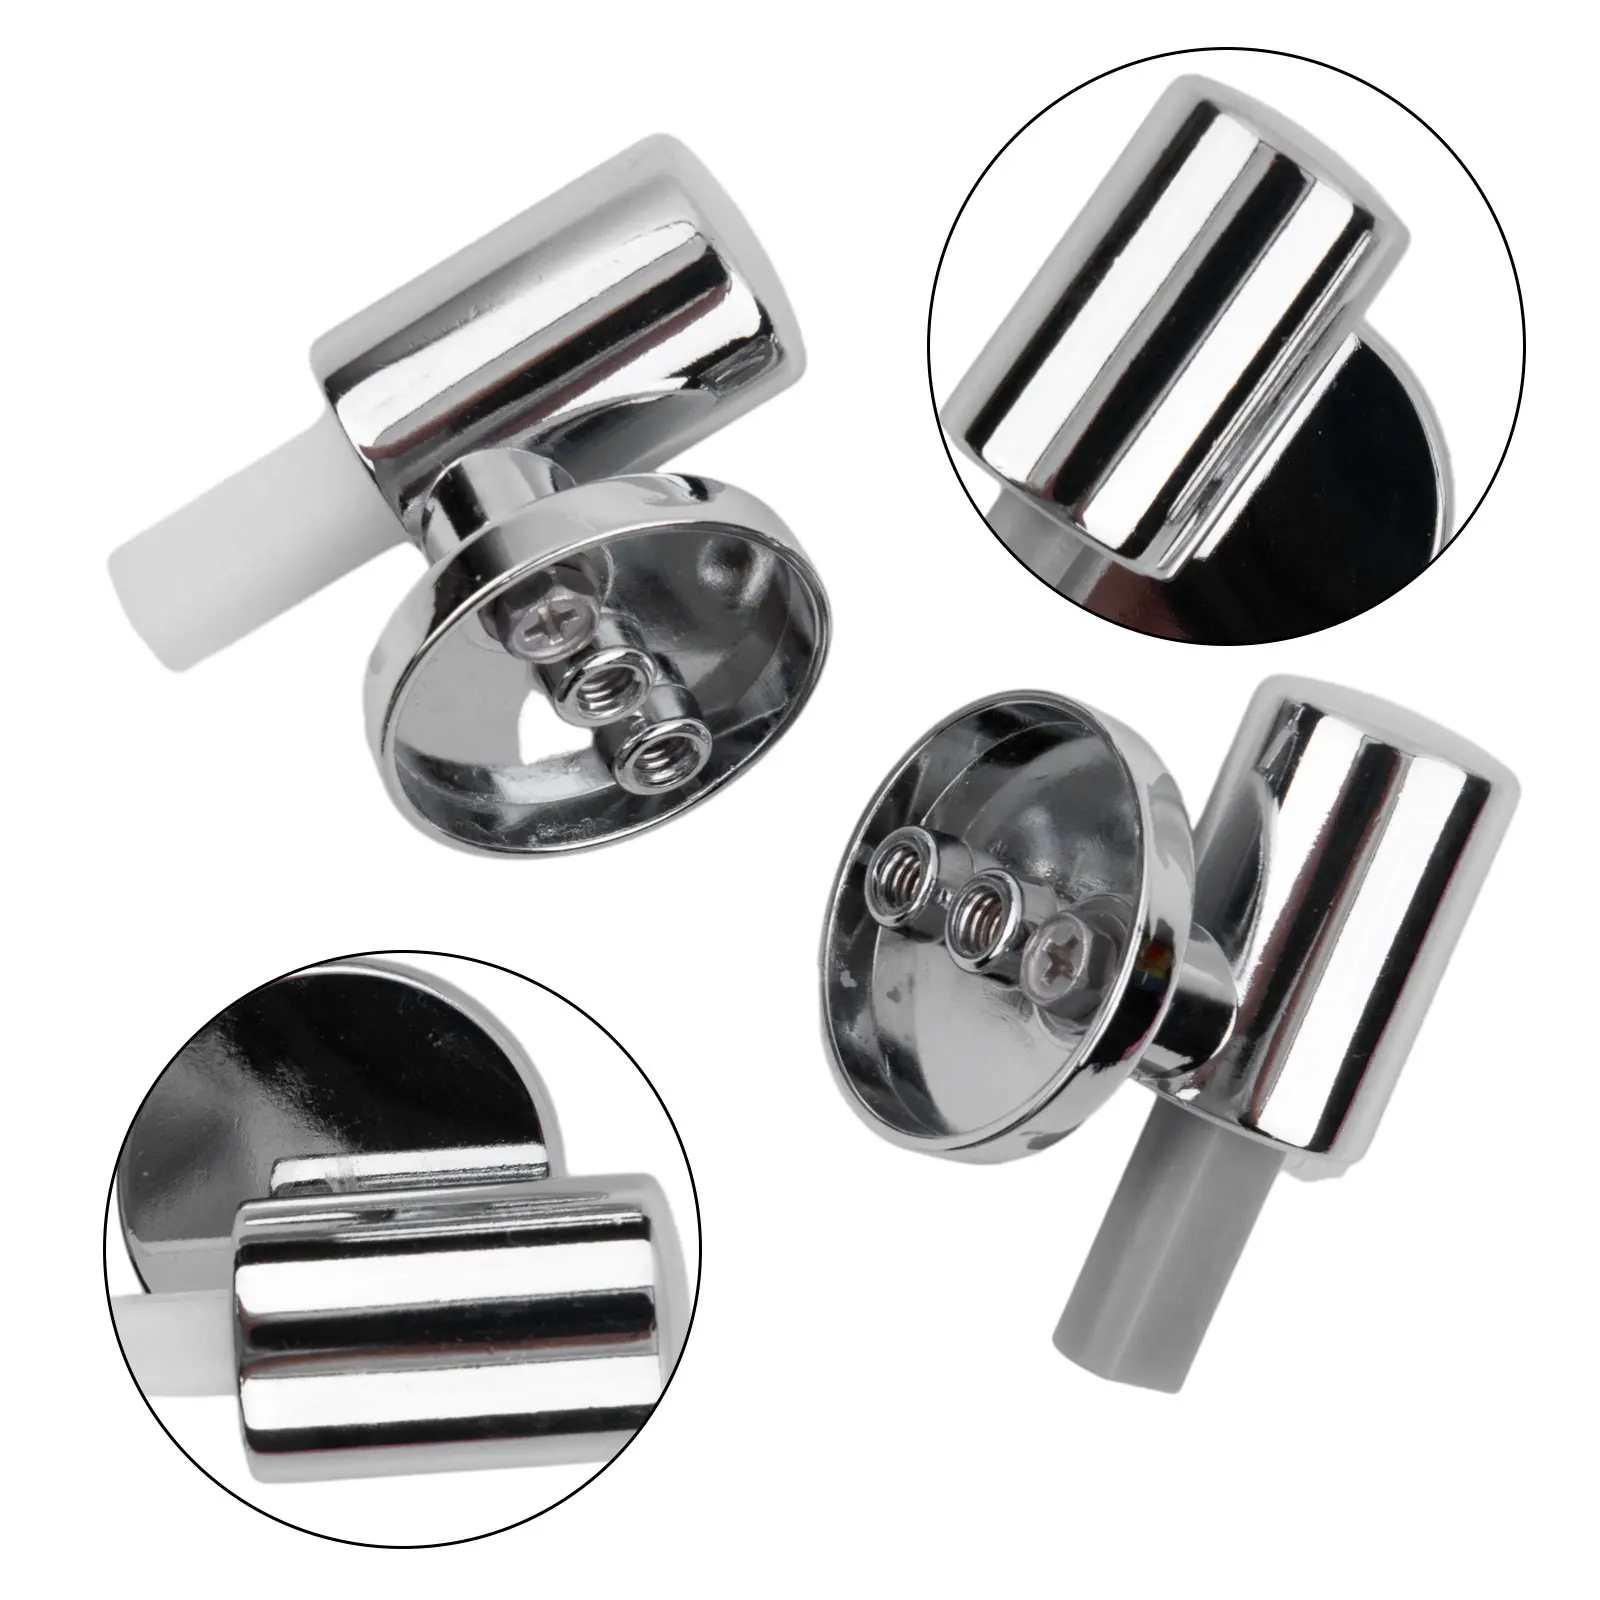 Hardware Toilet Hinges Home Improvement Furniture Hardware Replacement Soft Close Hinges Toilet Top Fixing Method 5pcs strong adhesive hinges clear acrylic small furniture hinges diy hinges replacement